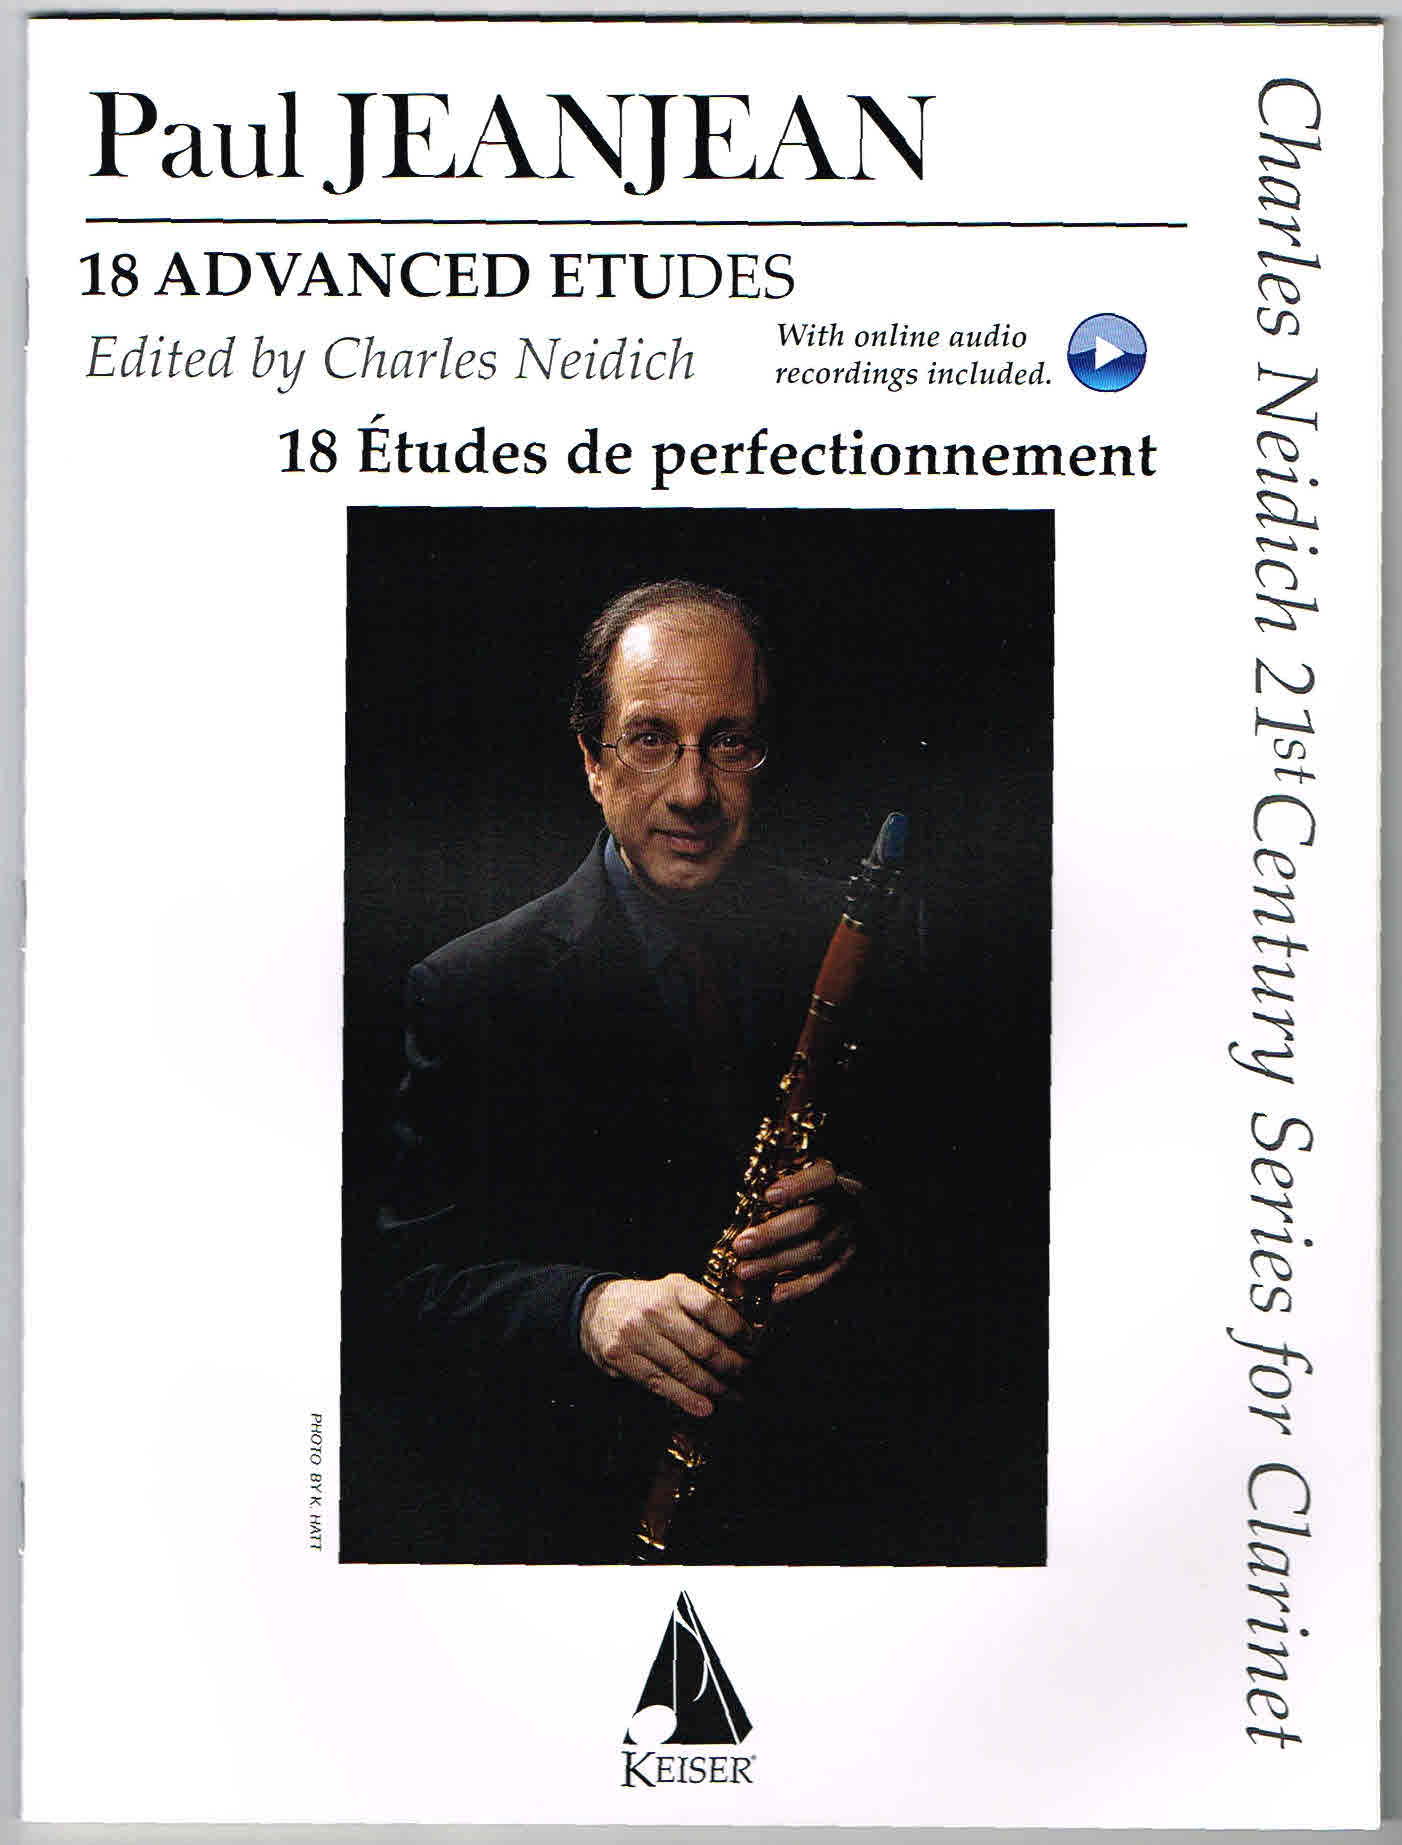 Paul Jean Jean - 18 Advanced Etudes for Clarinet by Charles Neidich (HL00042385) - Picture 1 of 1